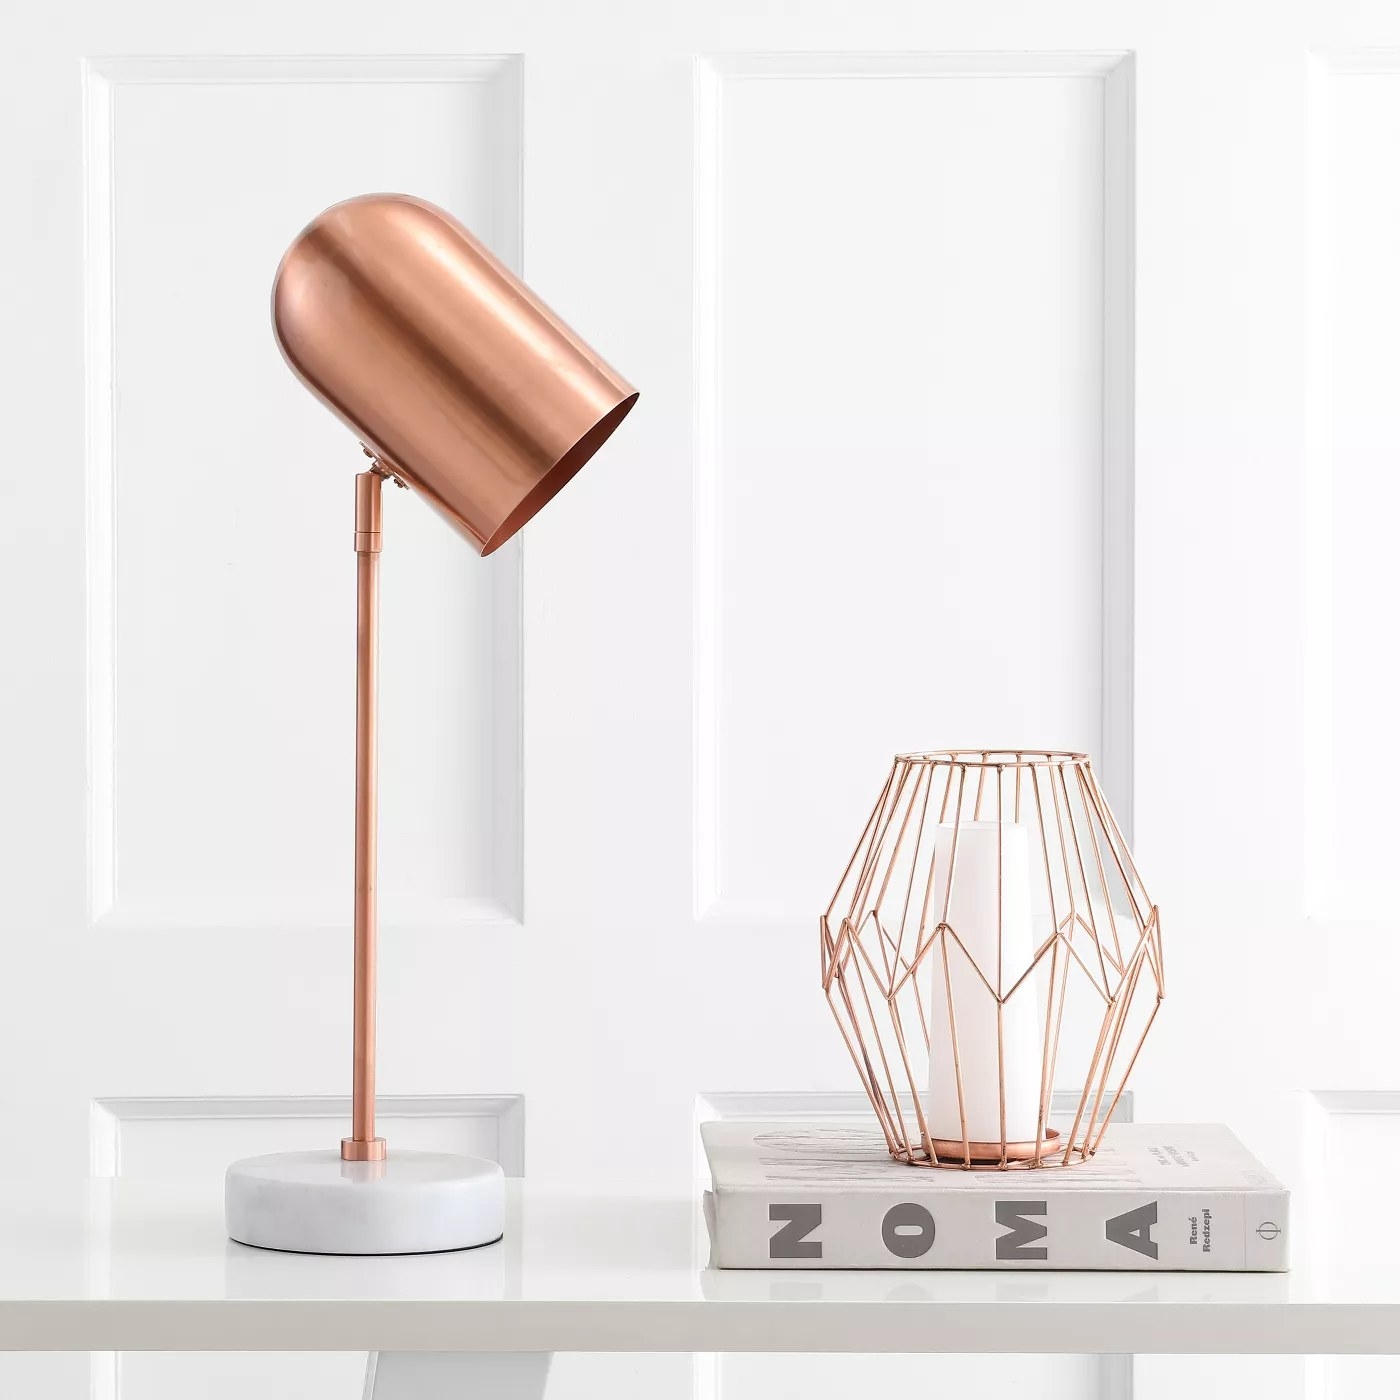 The copper and white table lamp